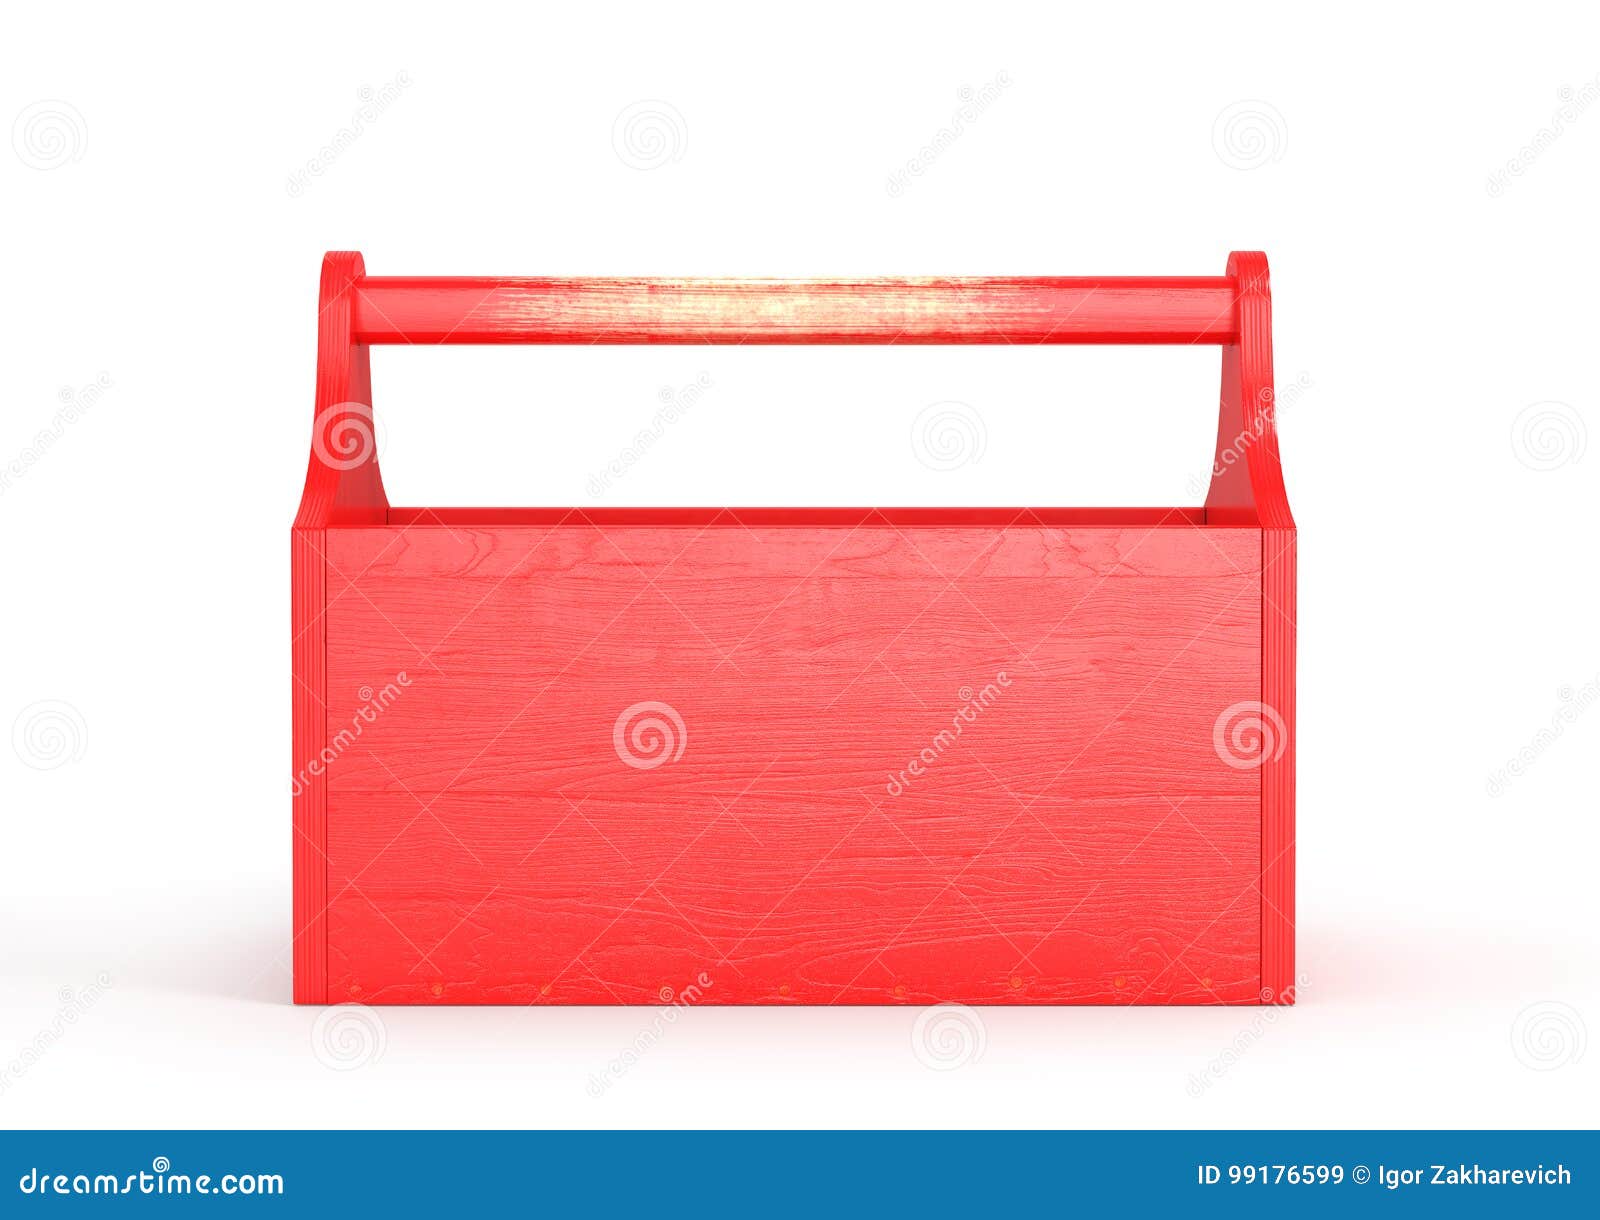 https://thumbs.dreamstime.com/z/red-empty-toolbox-red-empty-toolbox-white-background-d-illustration-99176599.jpg